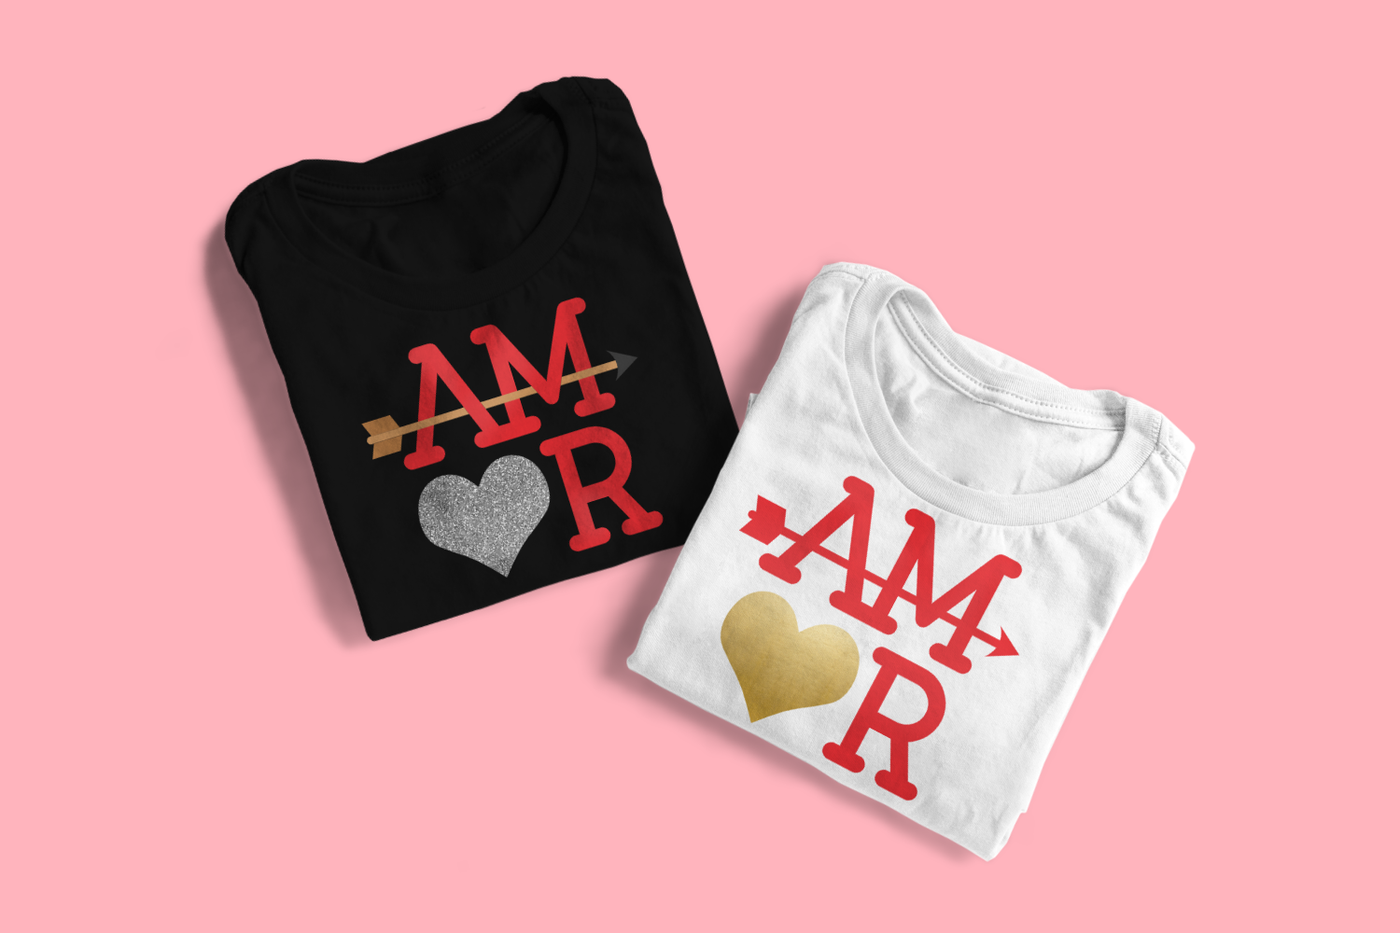 A black and white folded tee sit on a pink background. Each has the word "AMOR" set on a square, with a heart for the O and an arrow running through the A and M.